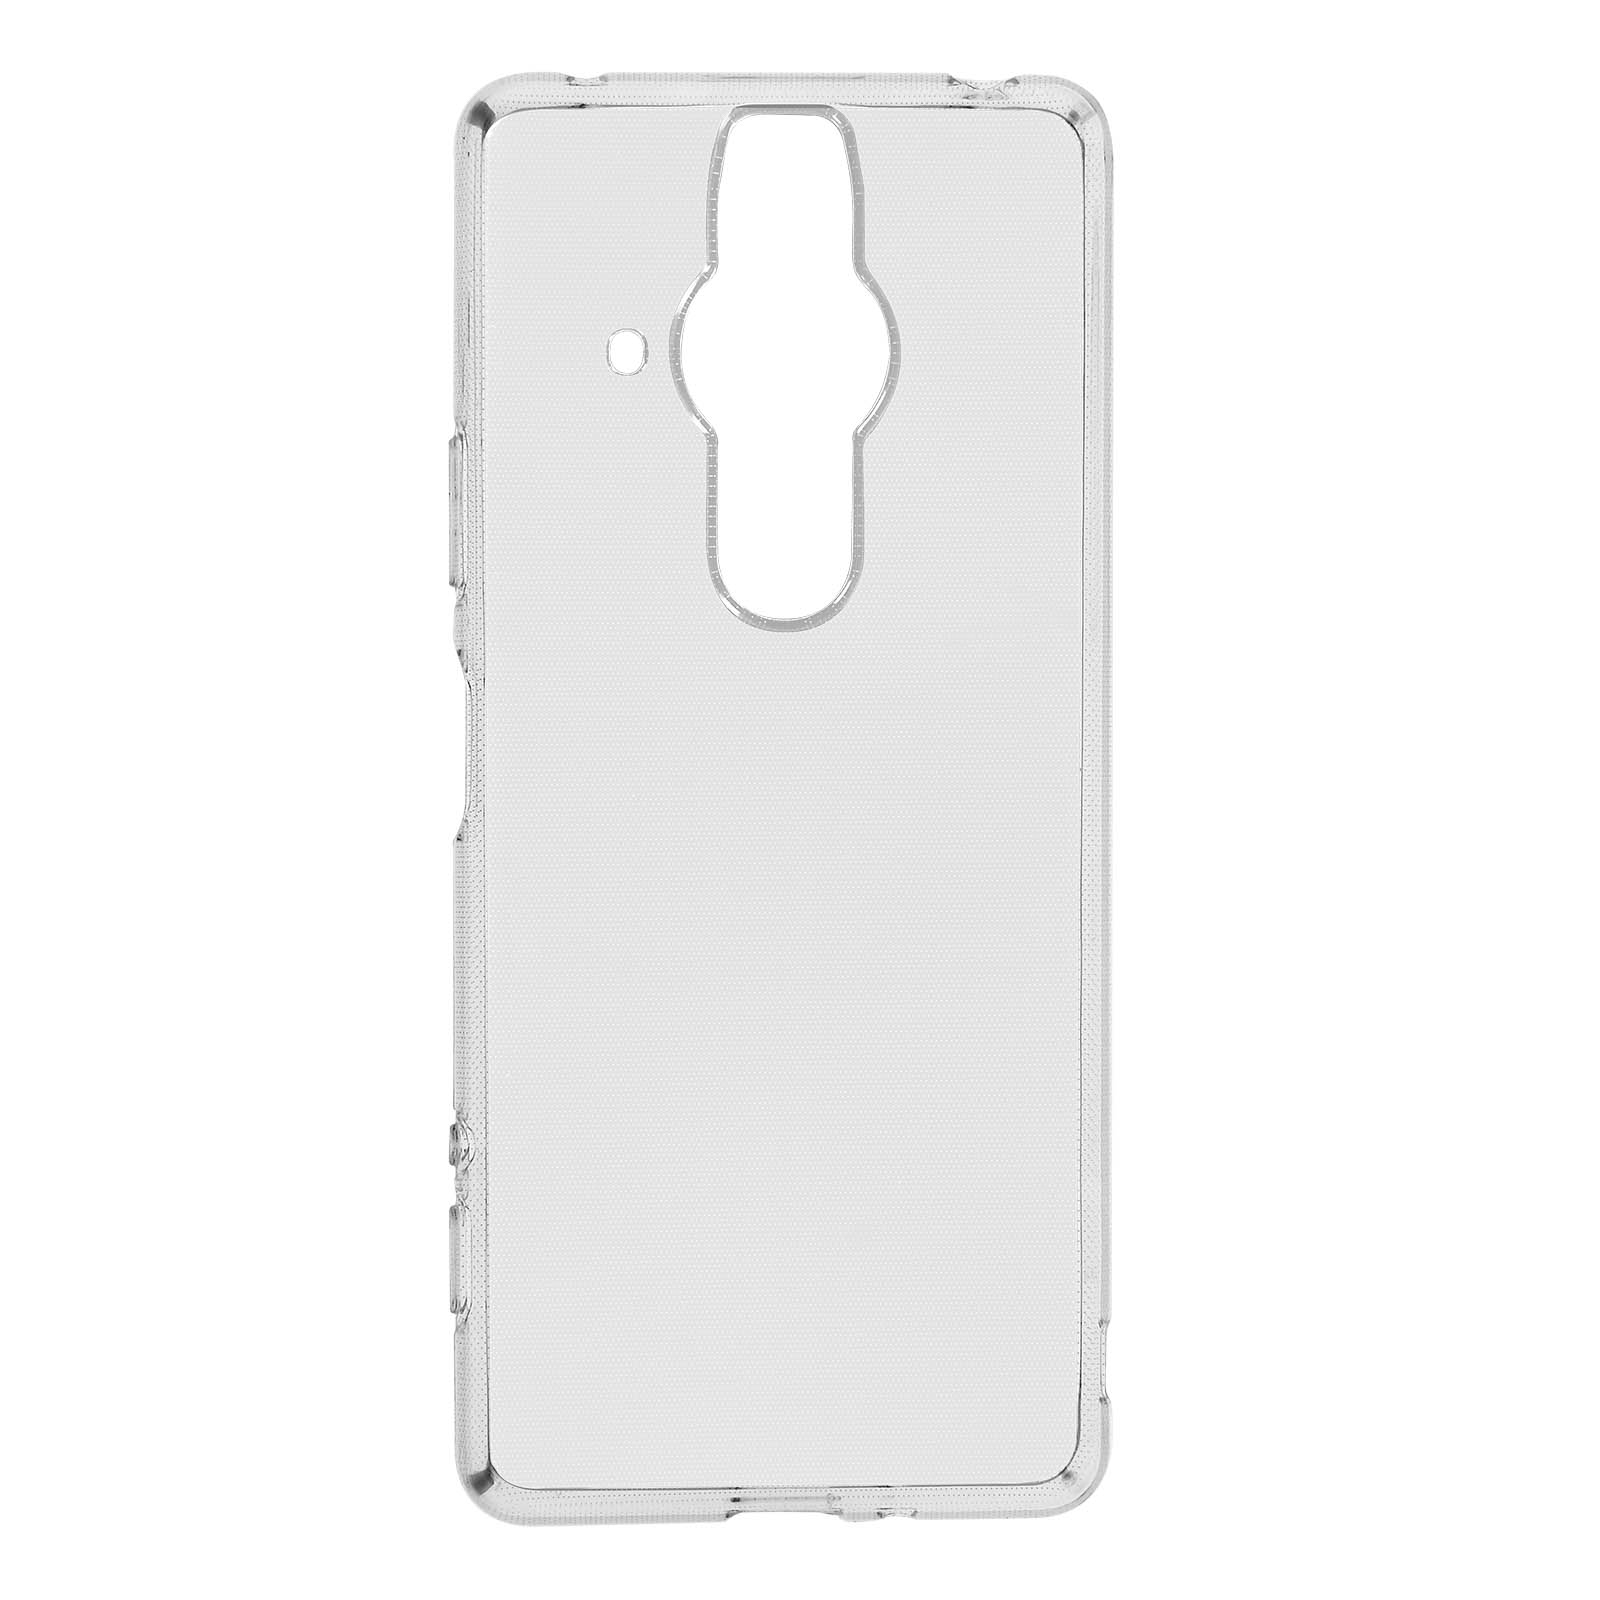 AVIZAR Uclear Series, Sony, Transparent Pro-I, Backcover, Xperia